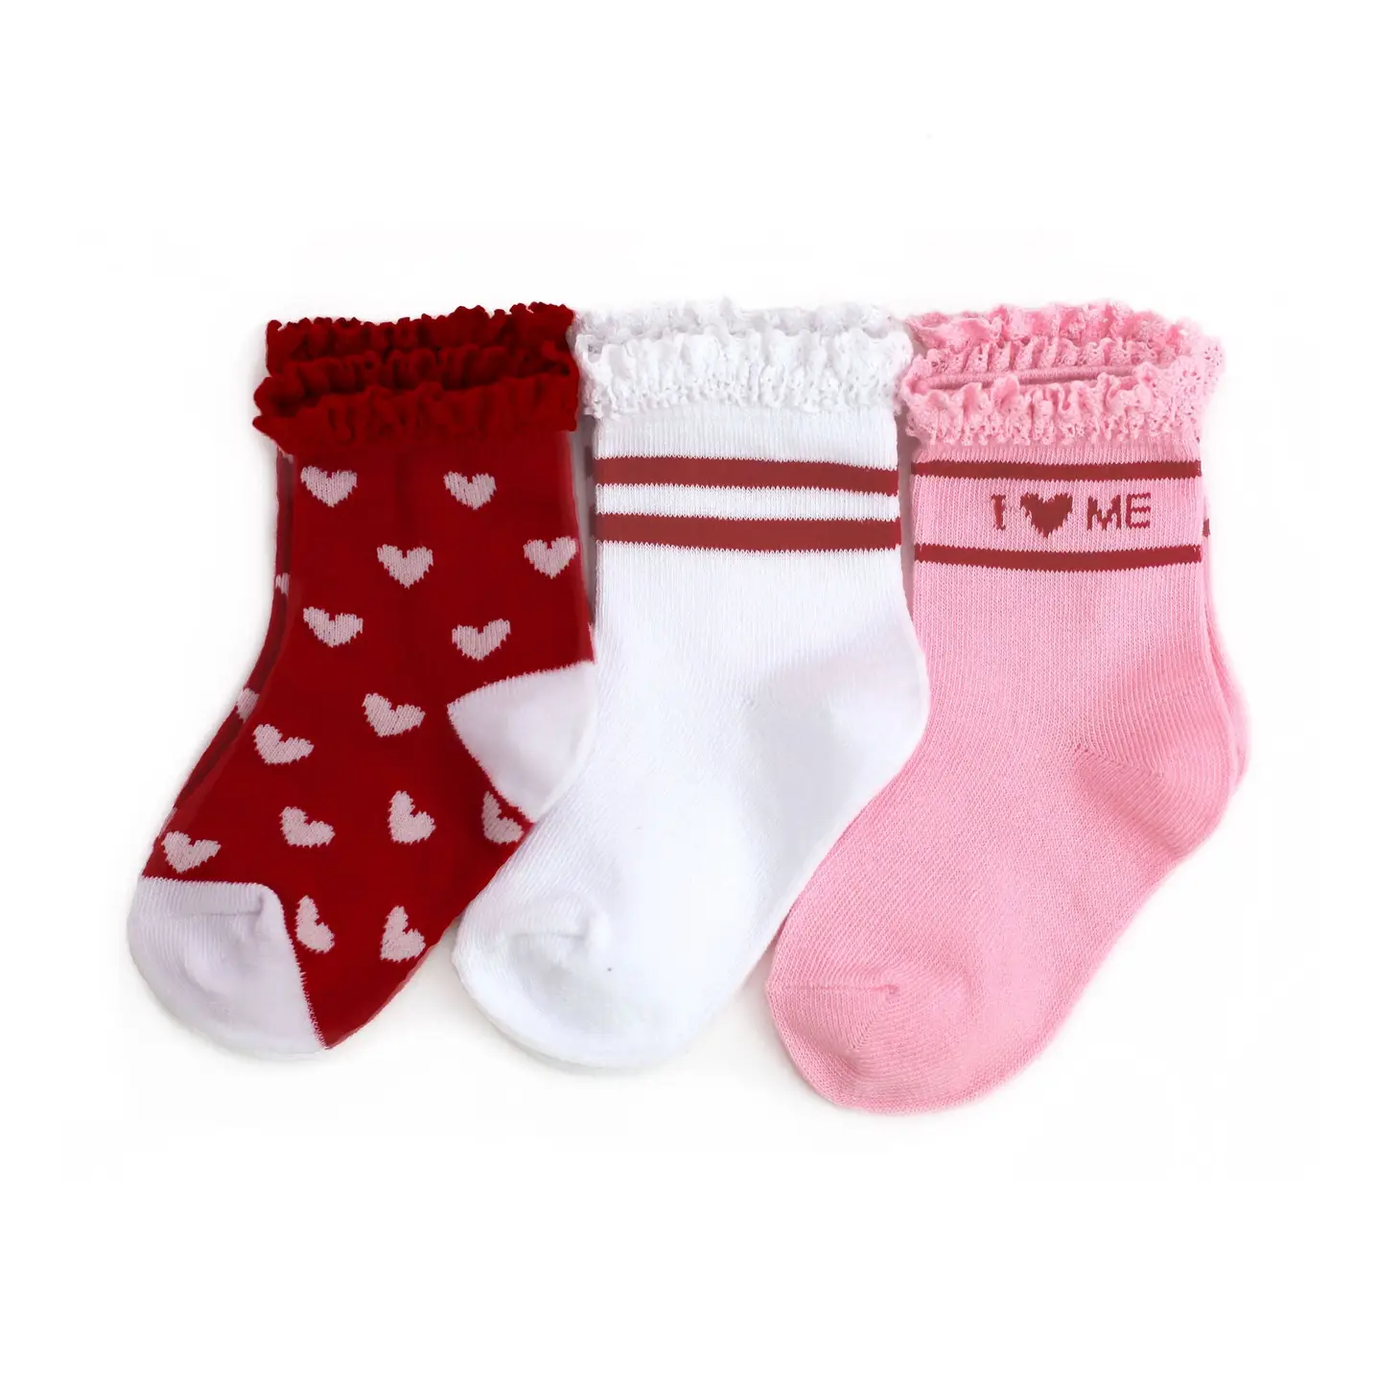 Little Stocking Co. Lace Midi 3-Pack: Valentine's